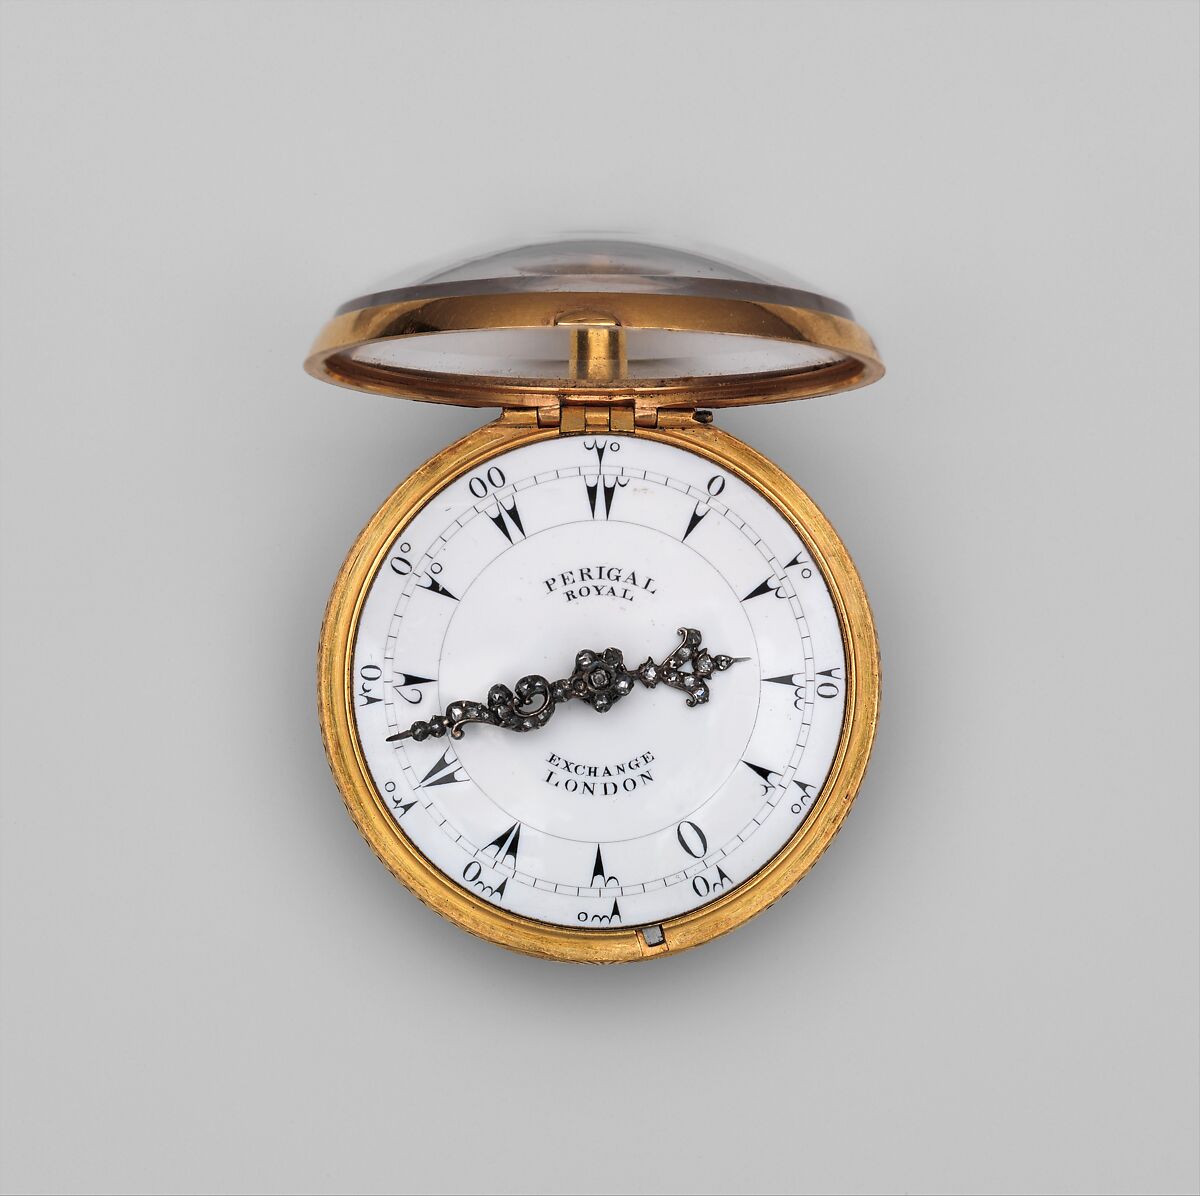 Repeating watch, Movement by Francis Perigal (British, active 1741–67), Dial: white enamel with black numerals and silver hands set with diamonds; Movement: gilded brass and partly blued steel, British, London, made for Turkish market 